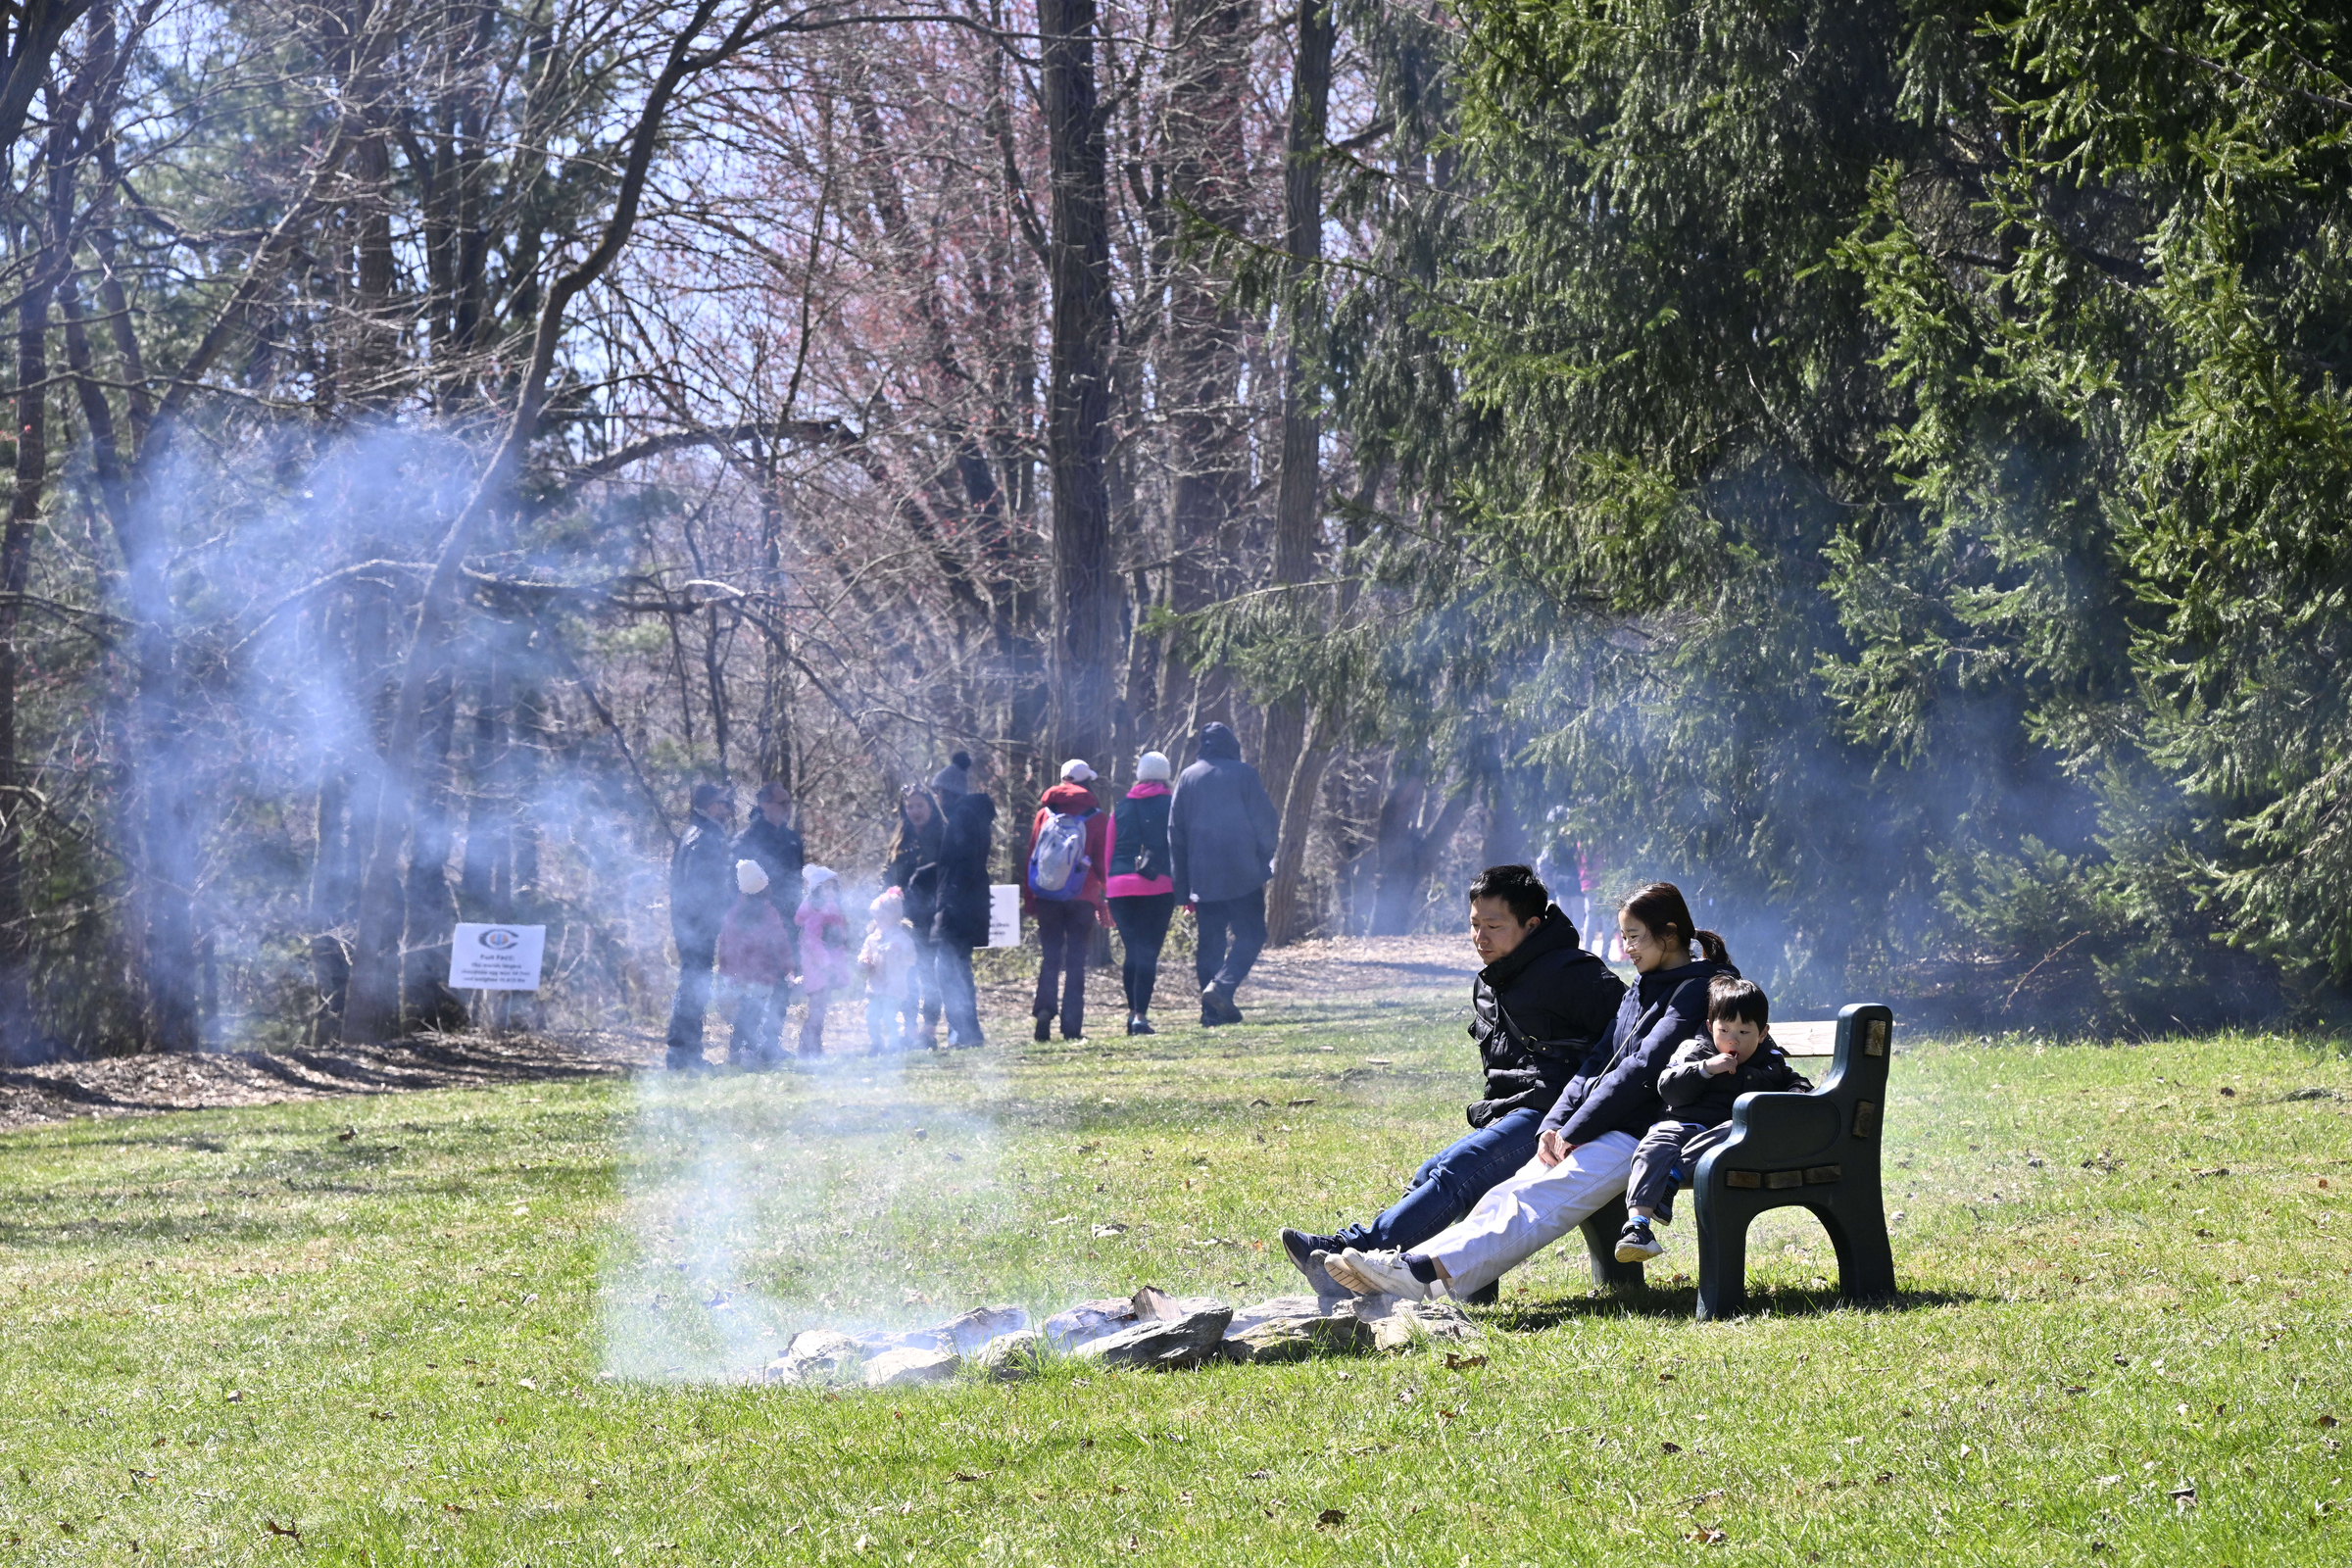 A family warms themselves by a fire while others stroll down a path during the Coppermine Eggstravaganza at Cascade Park in Hampstead. (Thomas Walker/Freelance)